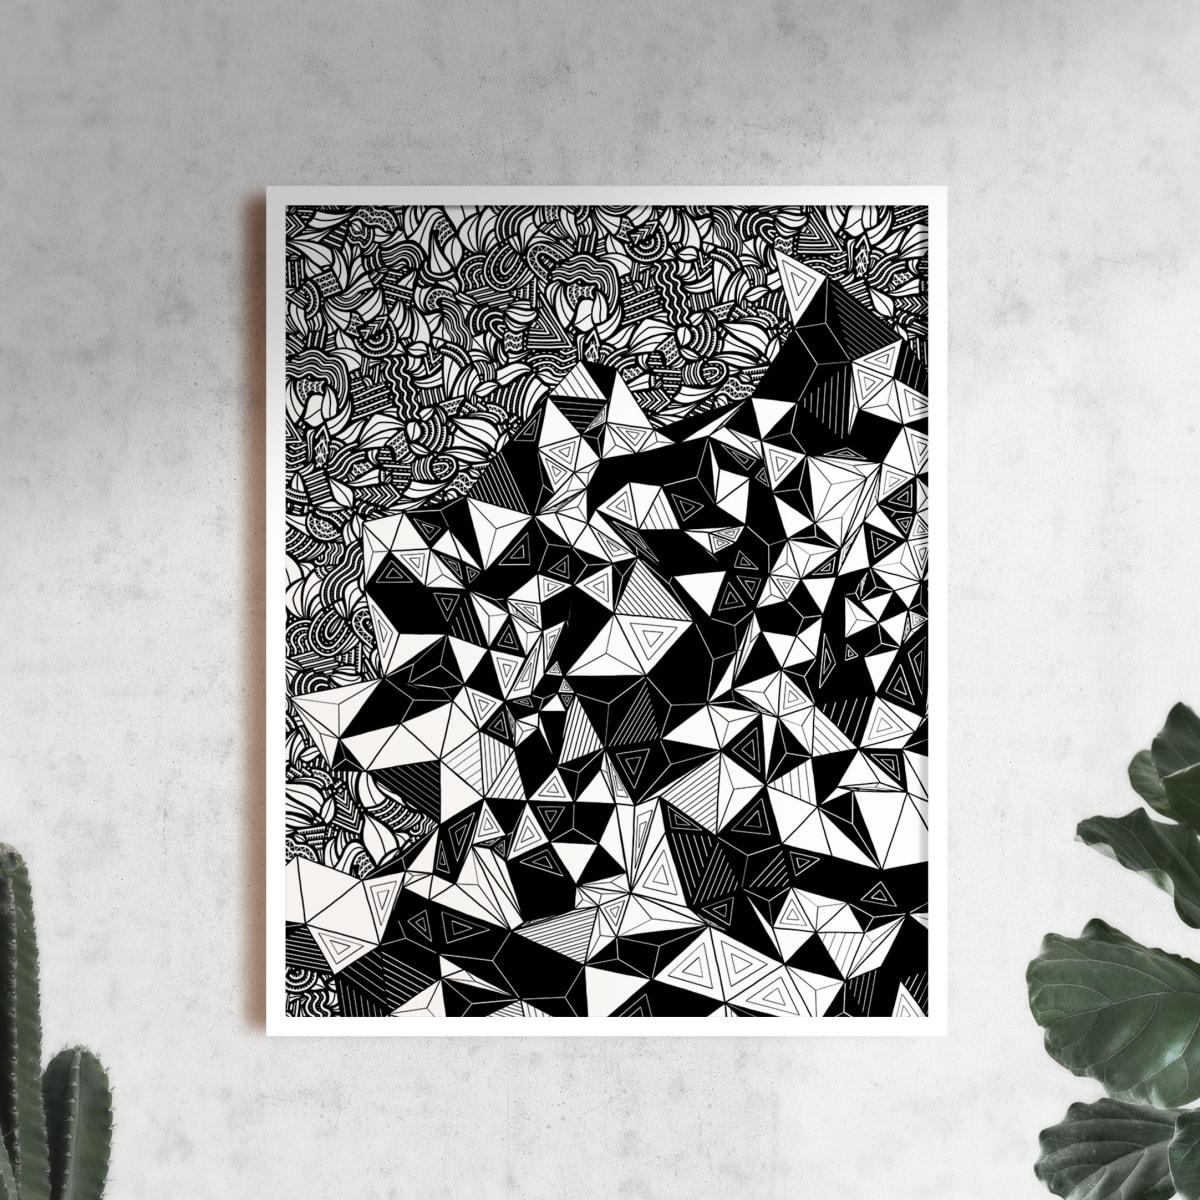 "Conscious Growth 064" Large One-of-a-Kind Print by Debbie Clapper  Image: Conscious Growth Print 064, a black and white one of a kind archival modern art print